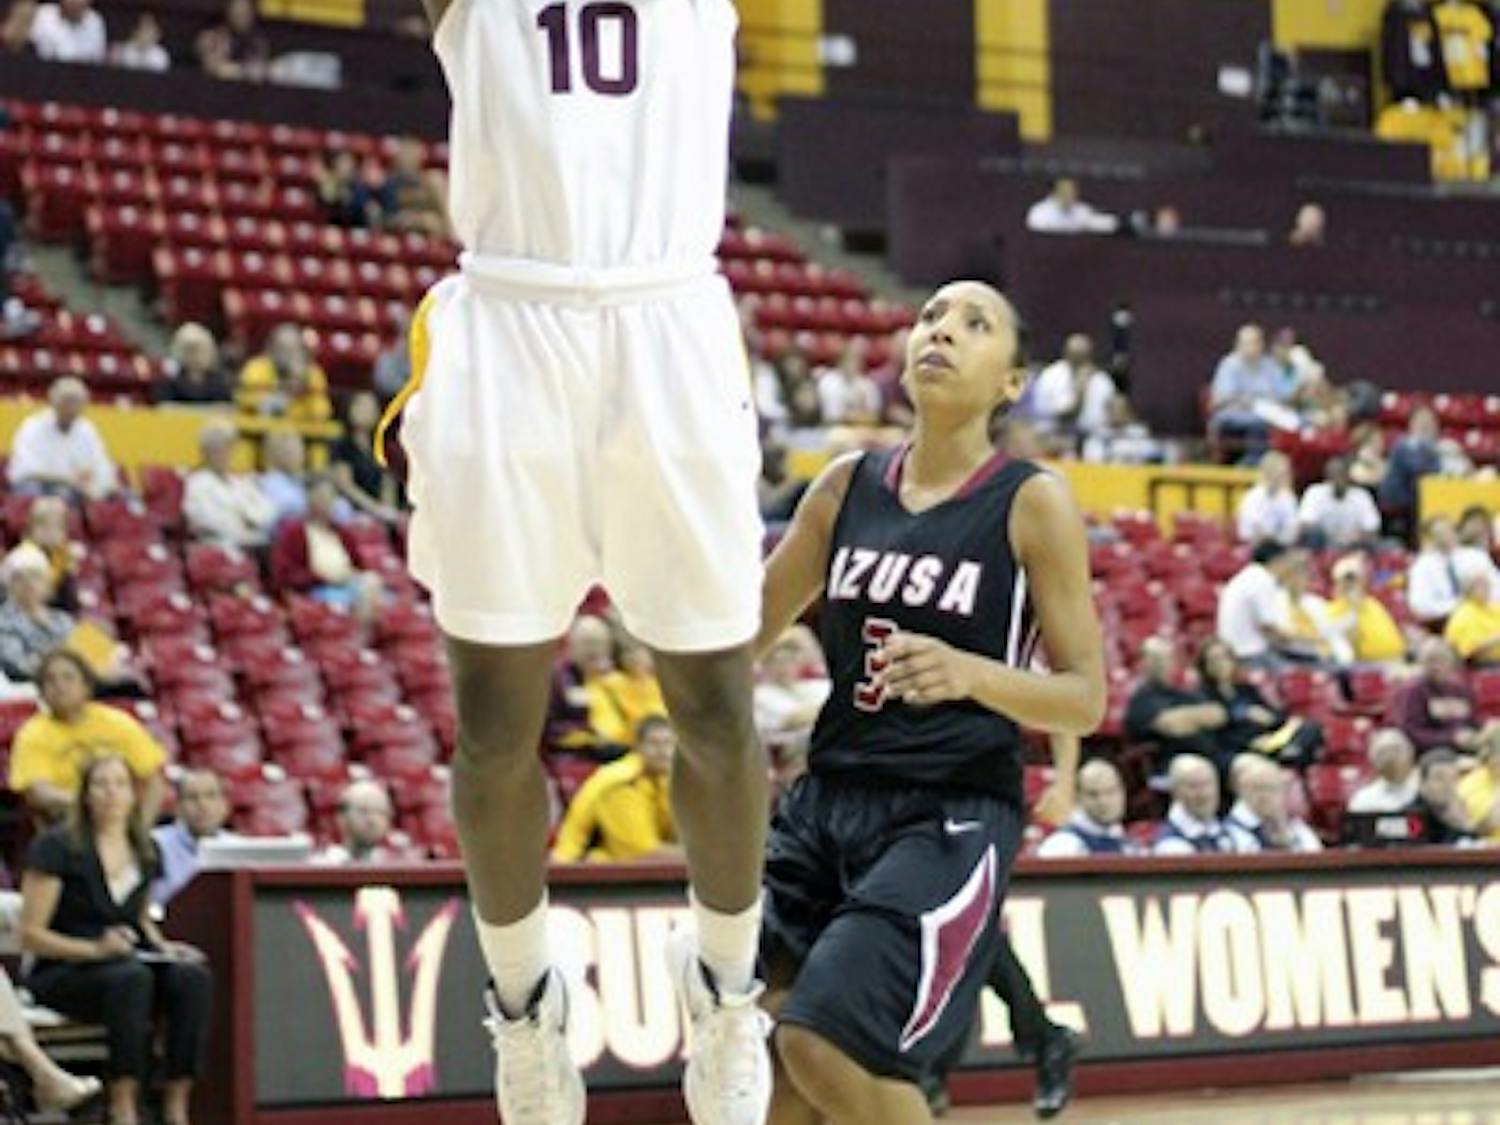 FRESH LEGS: ASU freshman guard Promise Amukamara goes up for a layup during the Sun Devils’ exhibition win against Azusa Pacific. ASU’s freshman shone during the exhibition, and will have a chance to make an impact again against UC Riverside. (Photo by Samuel Rosenbaum)